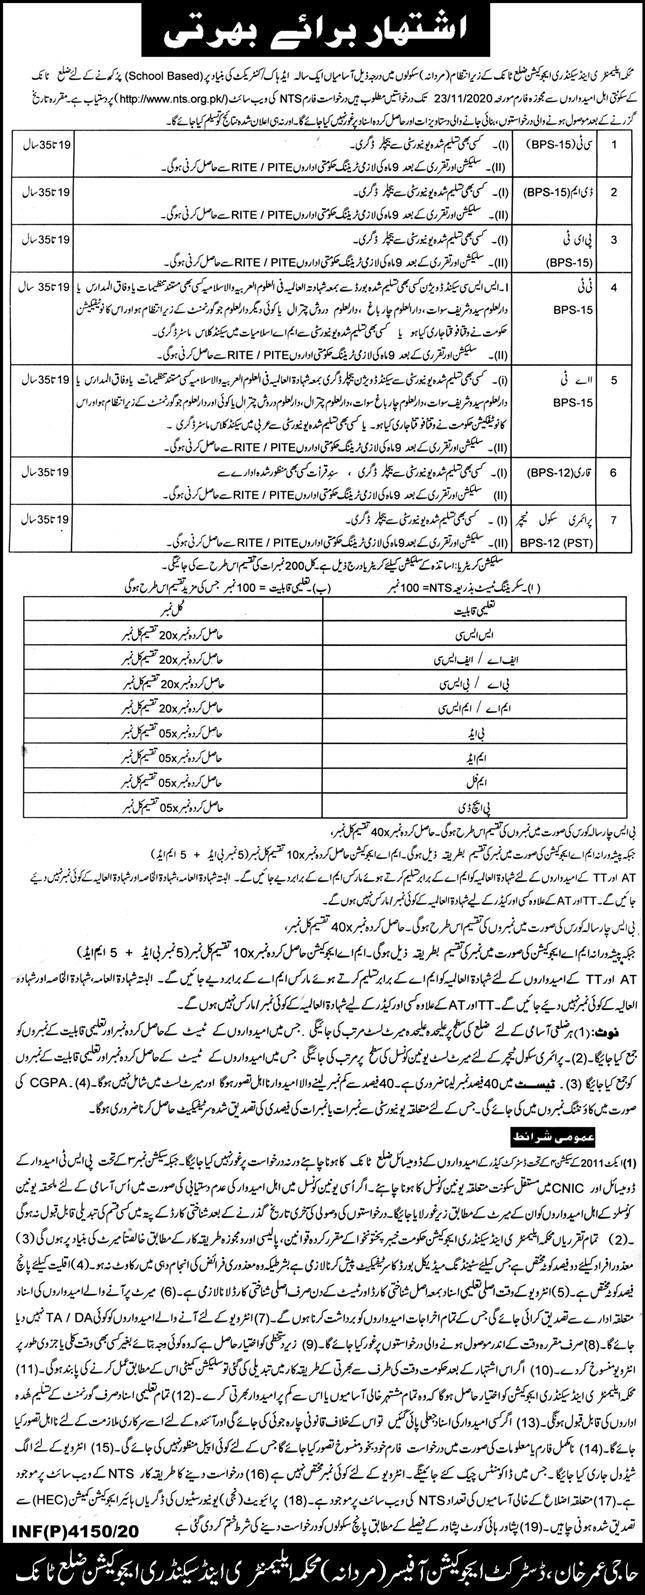 NTS Jobs in KPK Elementary and Secondary Education 2020